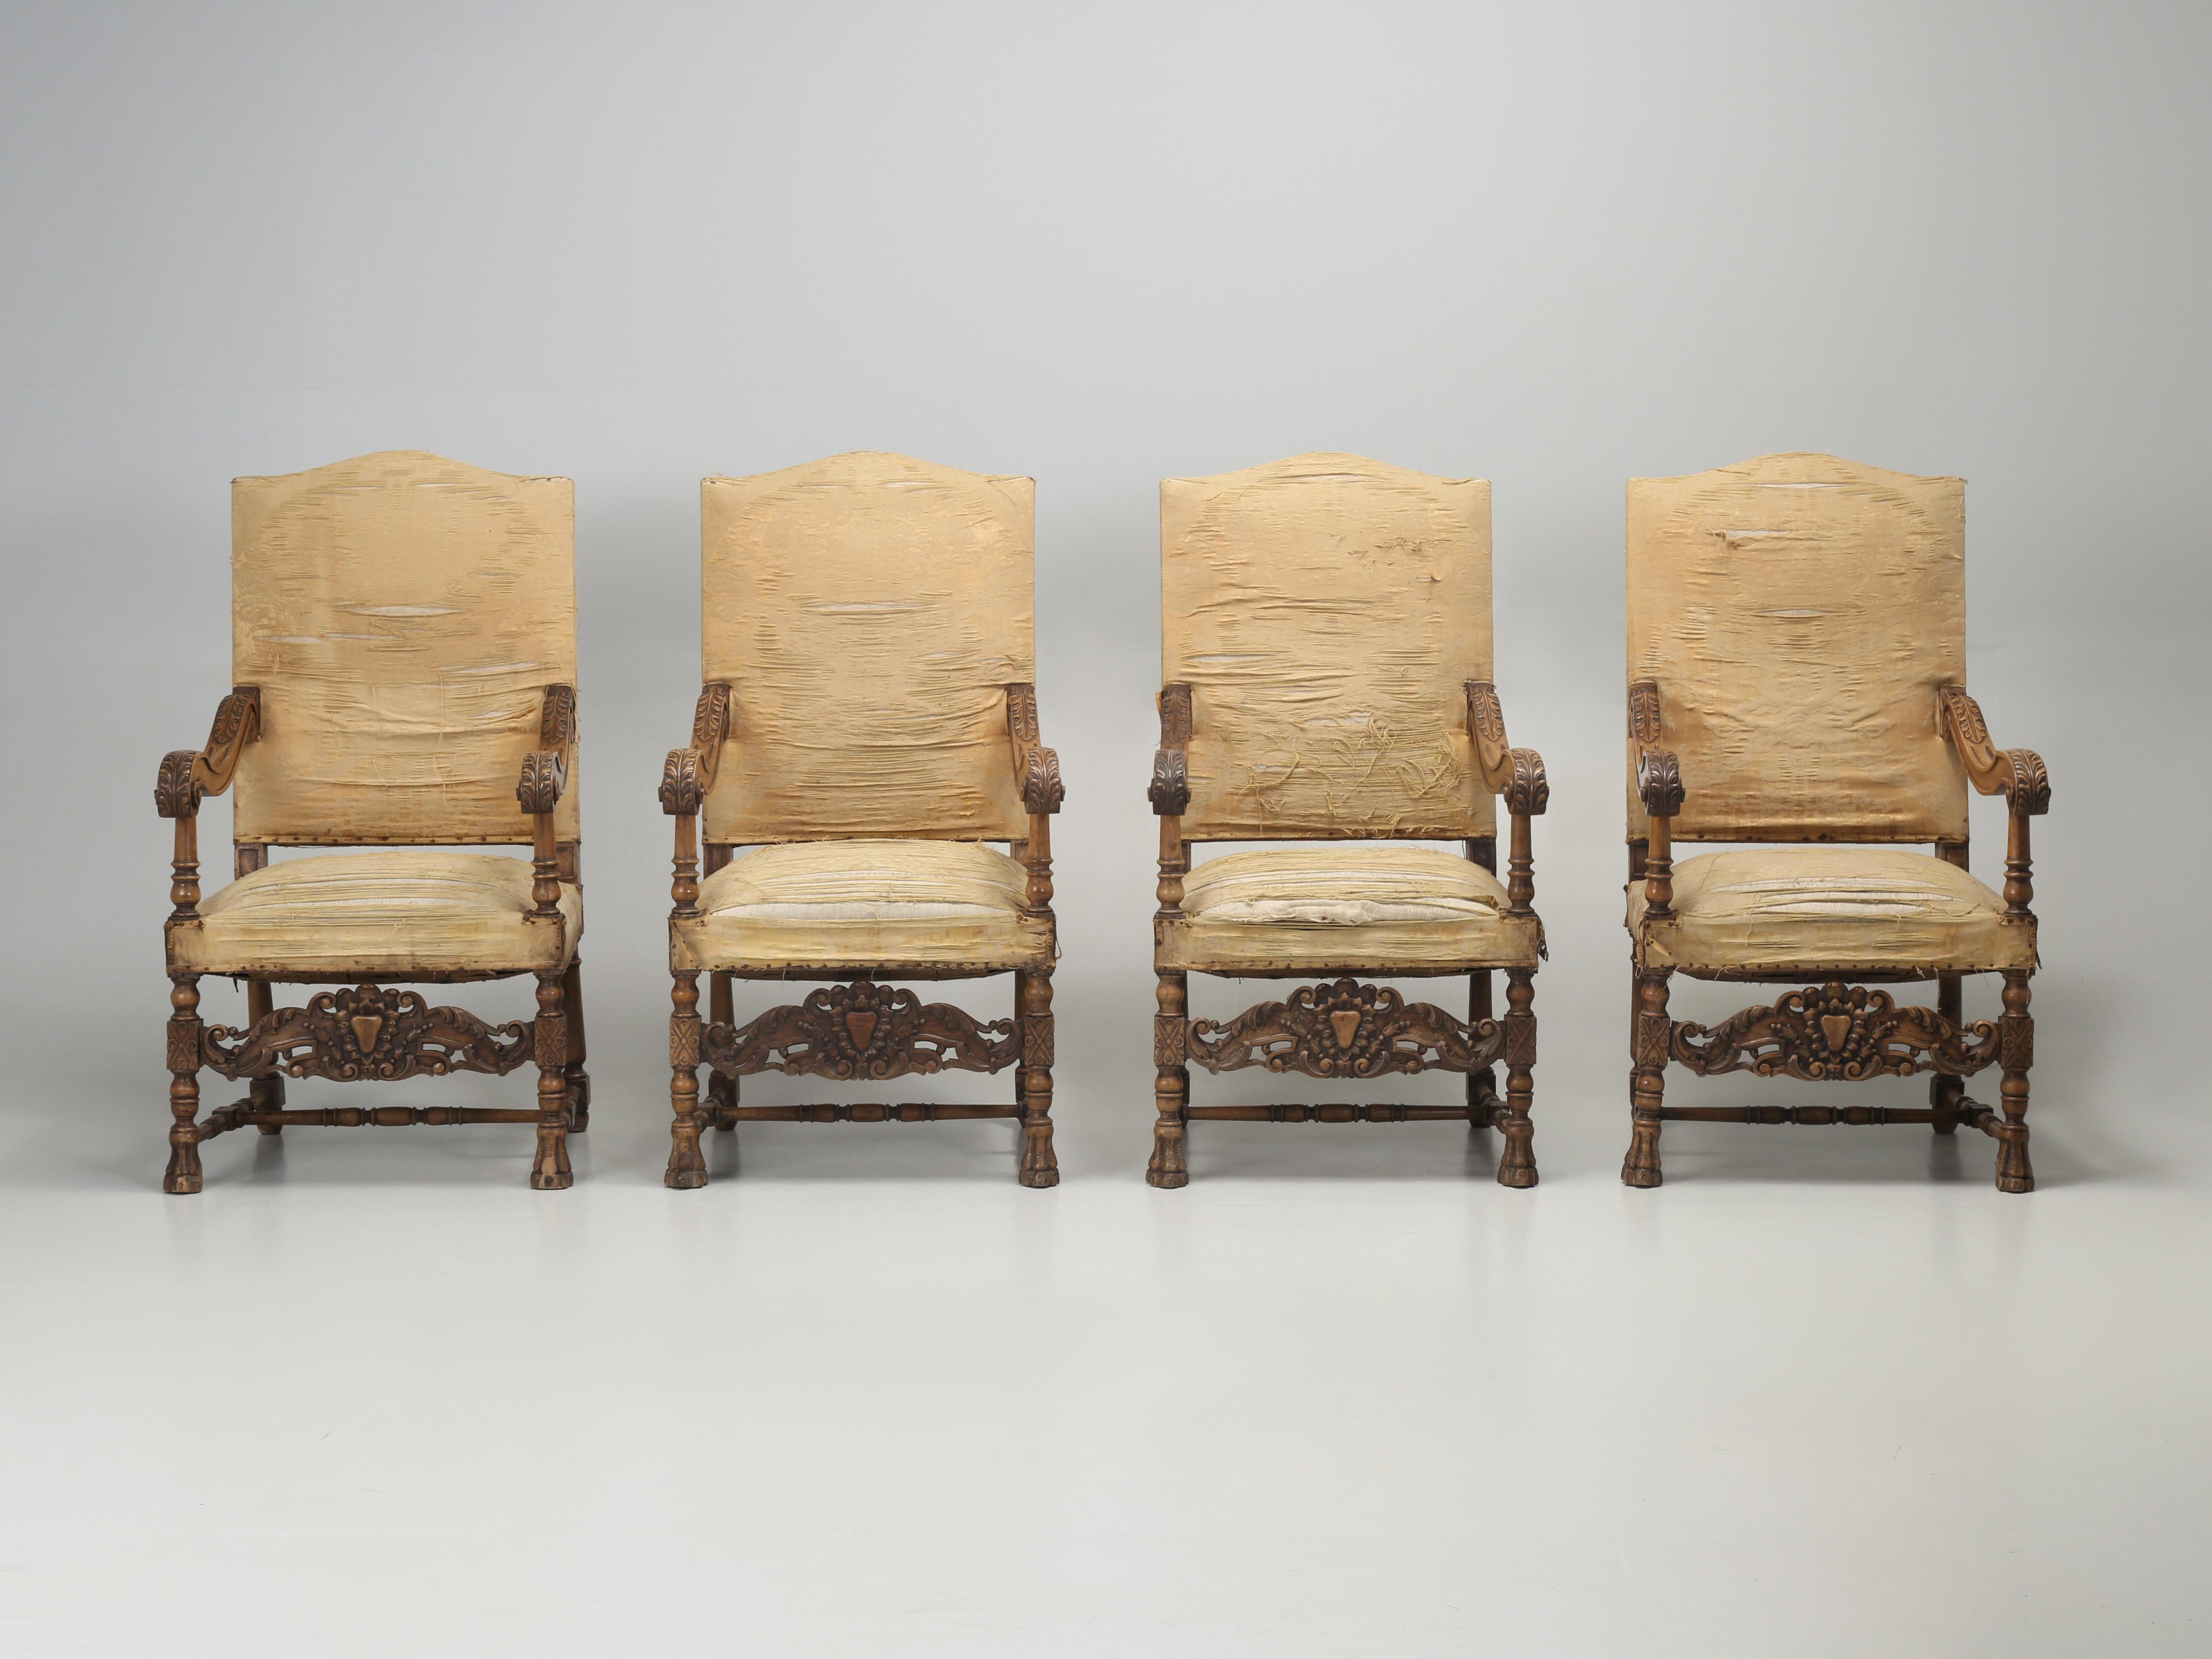 Antique Pair of Italian Armchairs Hand Carved Walnut Require Restoration, C1880s For Sale 13